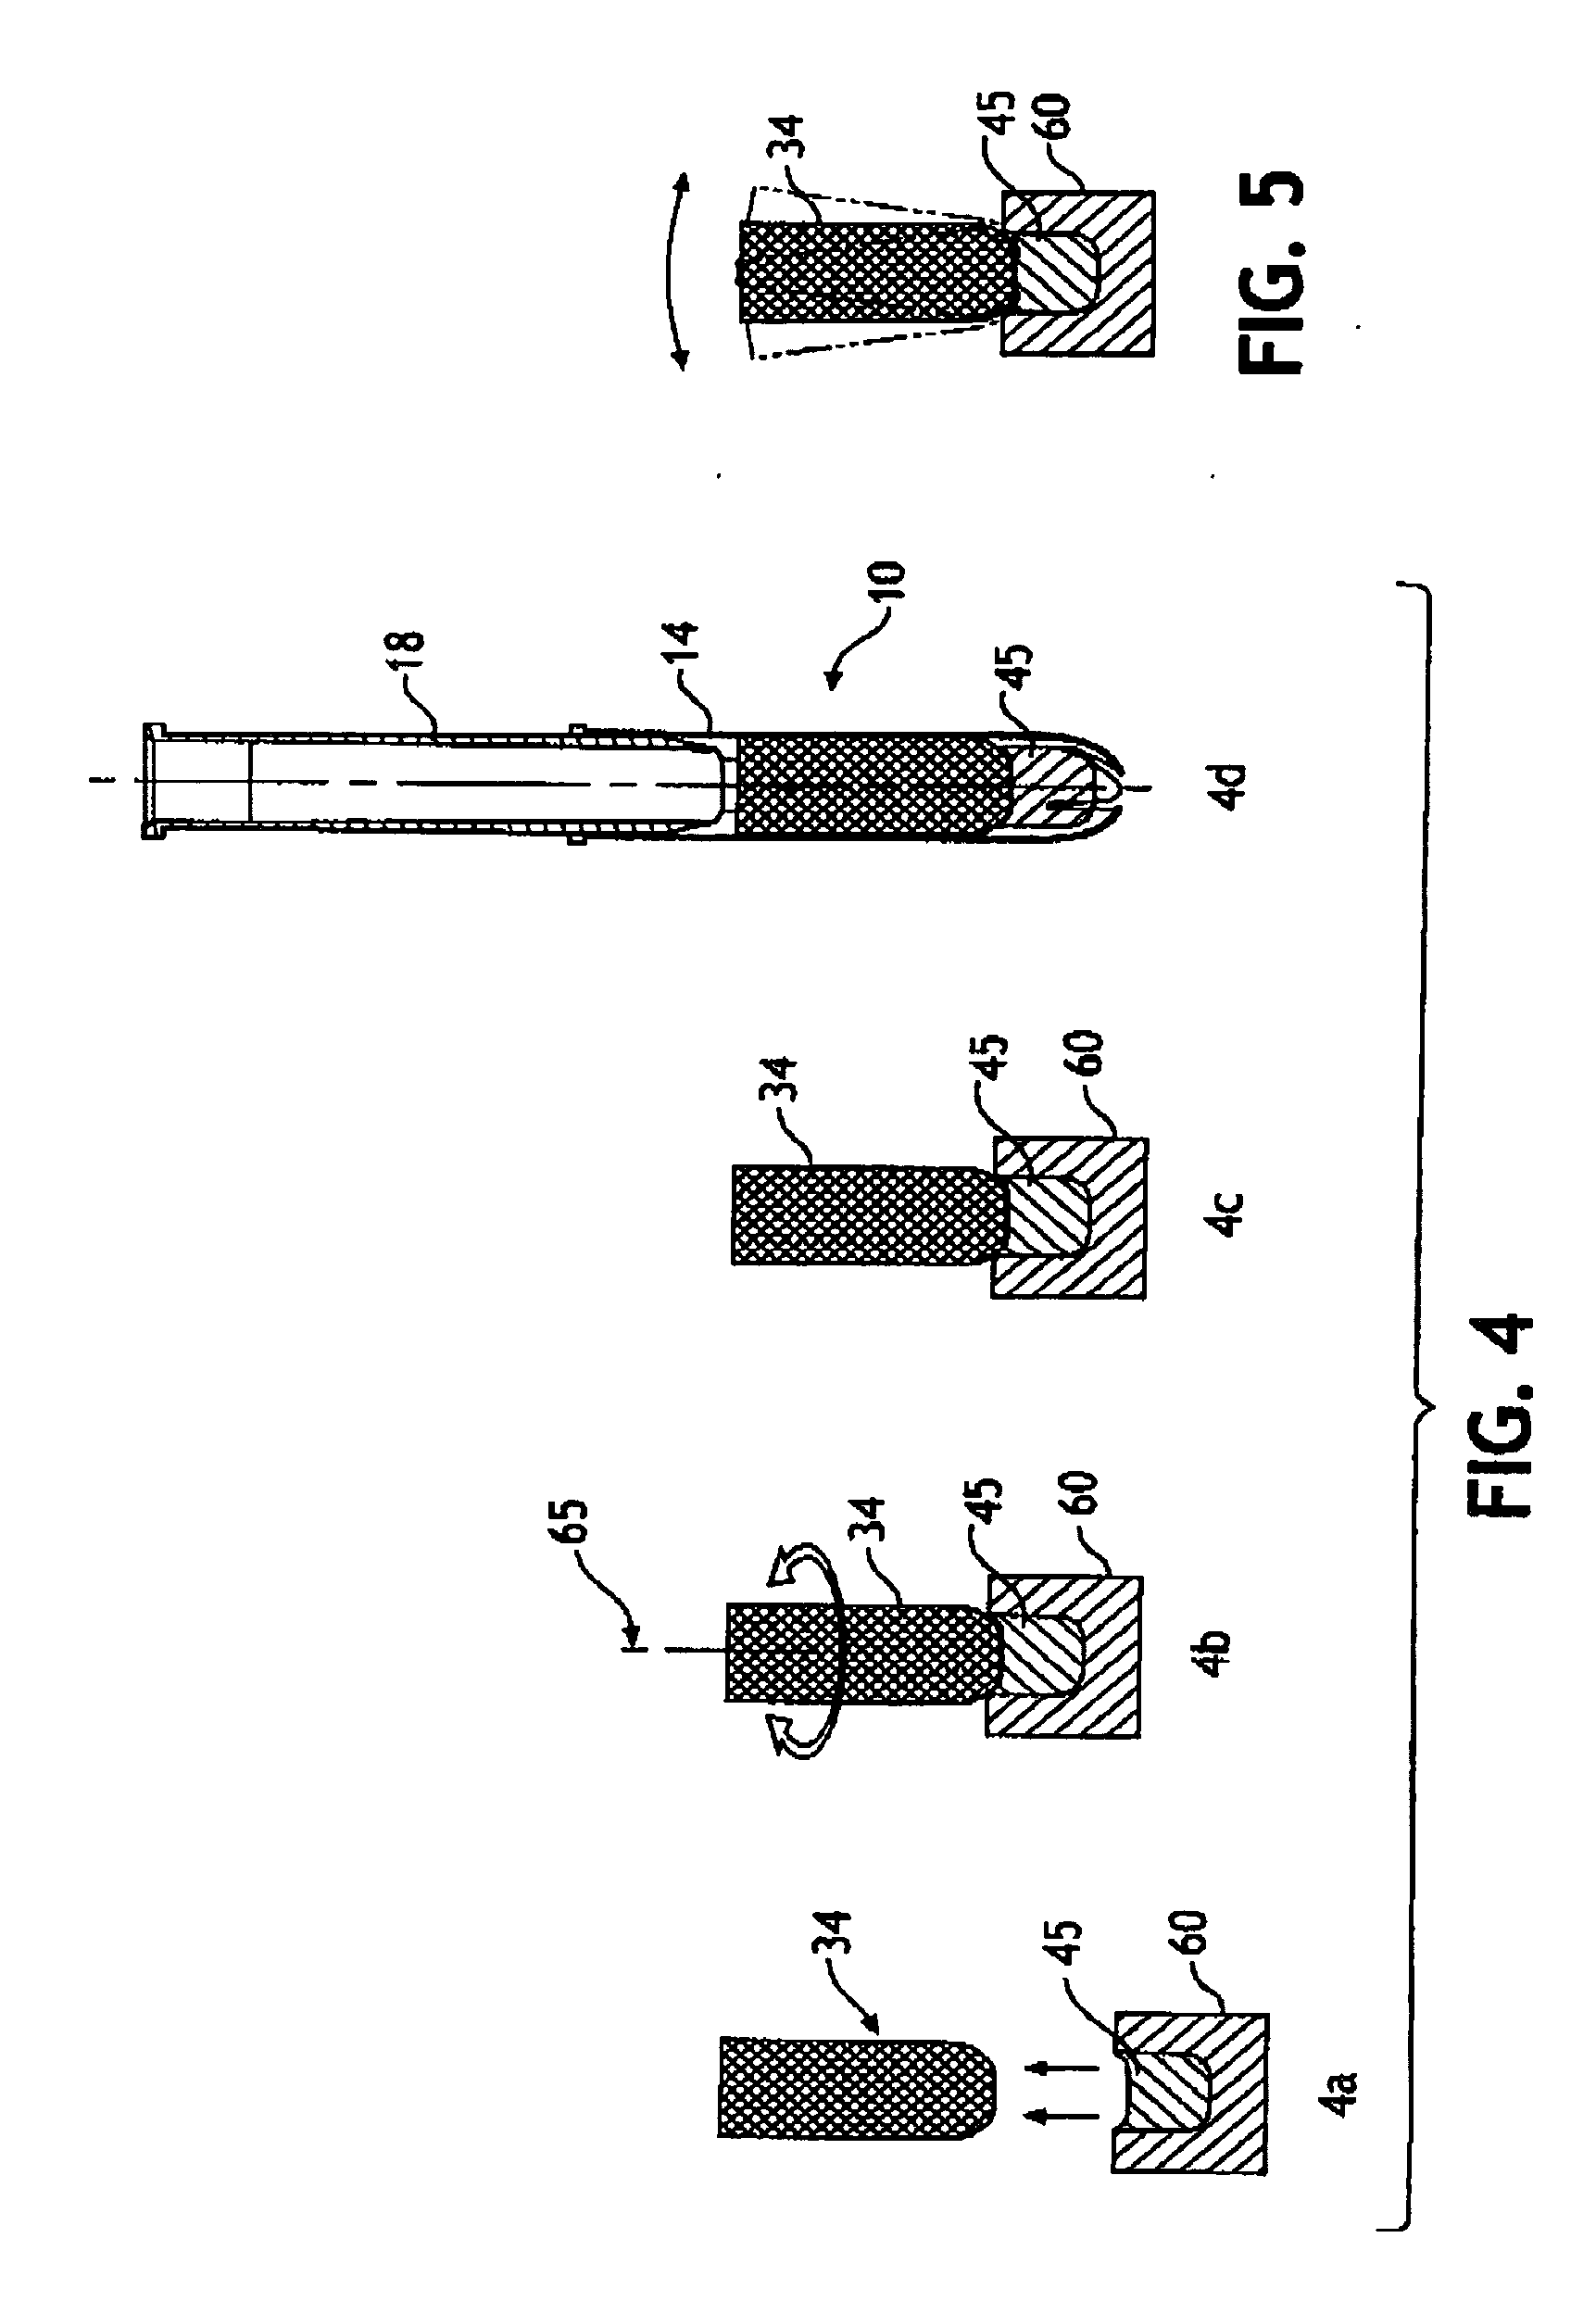 Methods of attaching a dosage form to a medicated tampon assembly